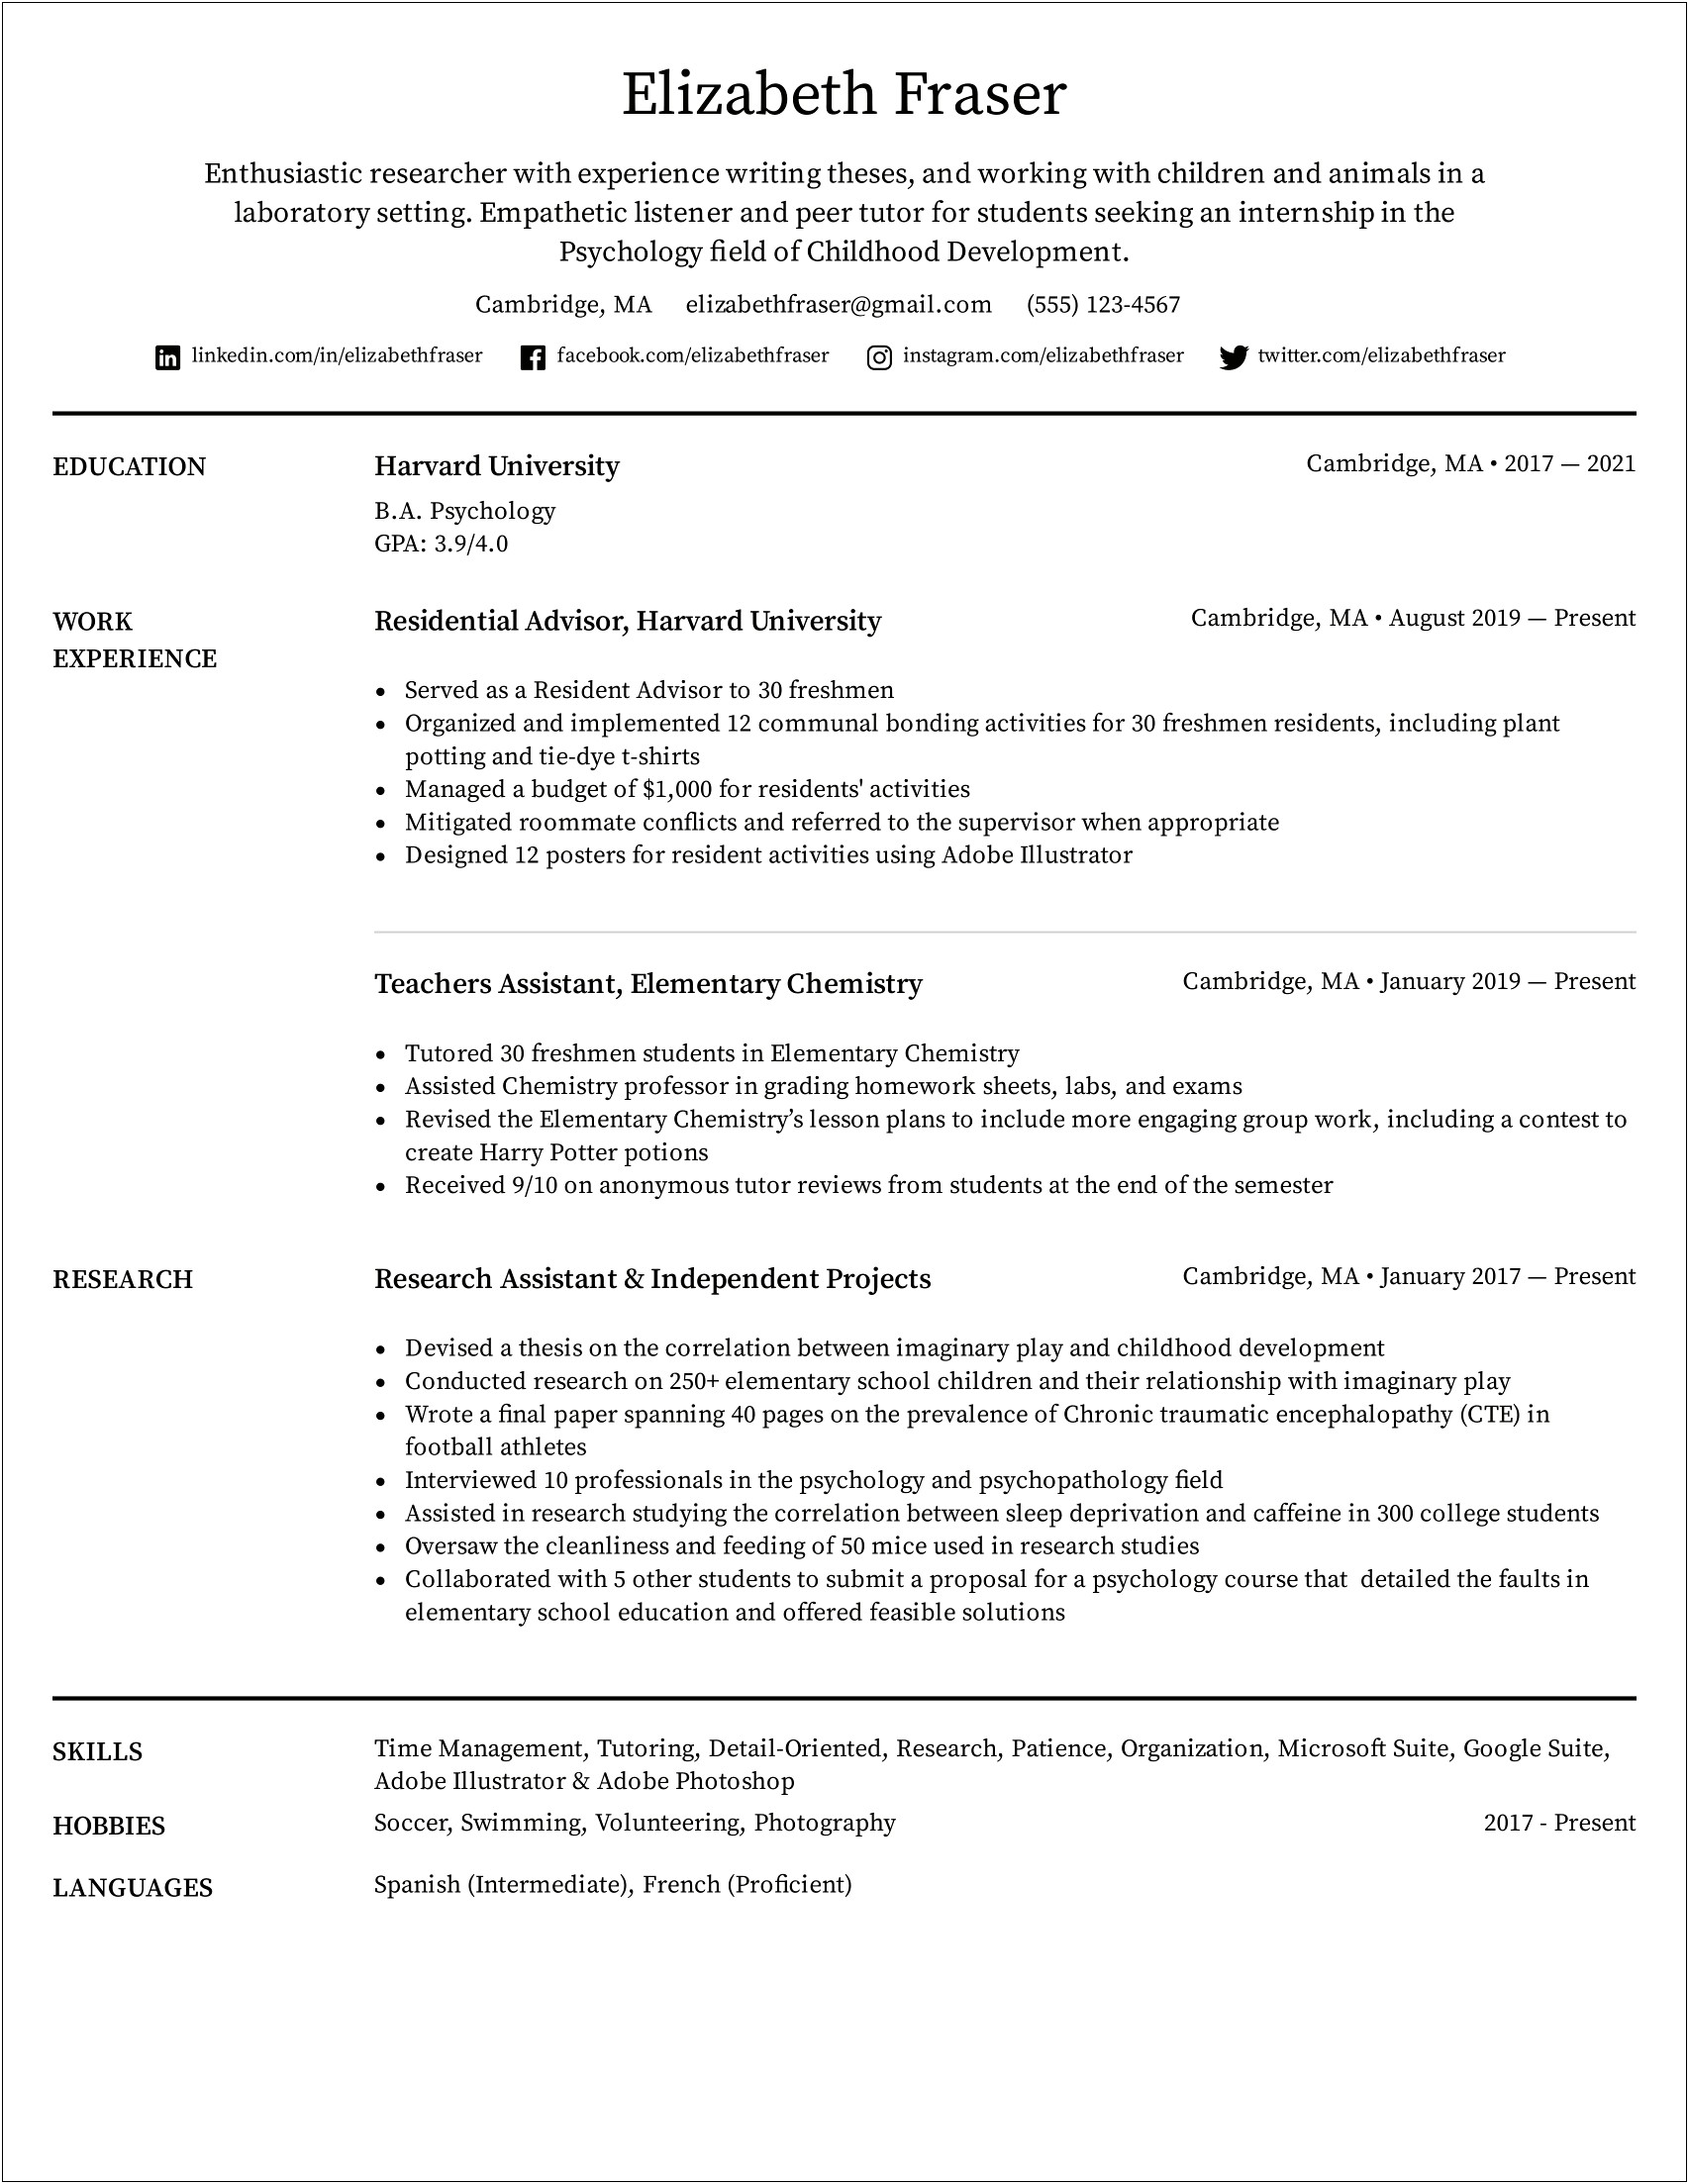 Summary Section On Resume For Recent Graduate